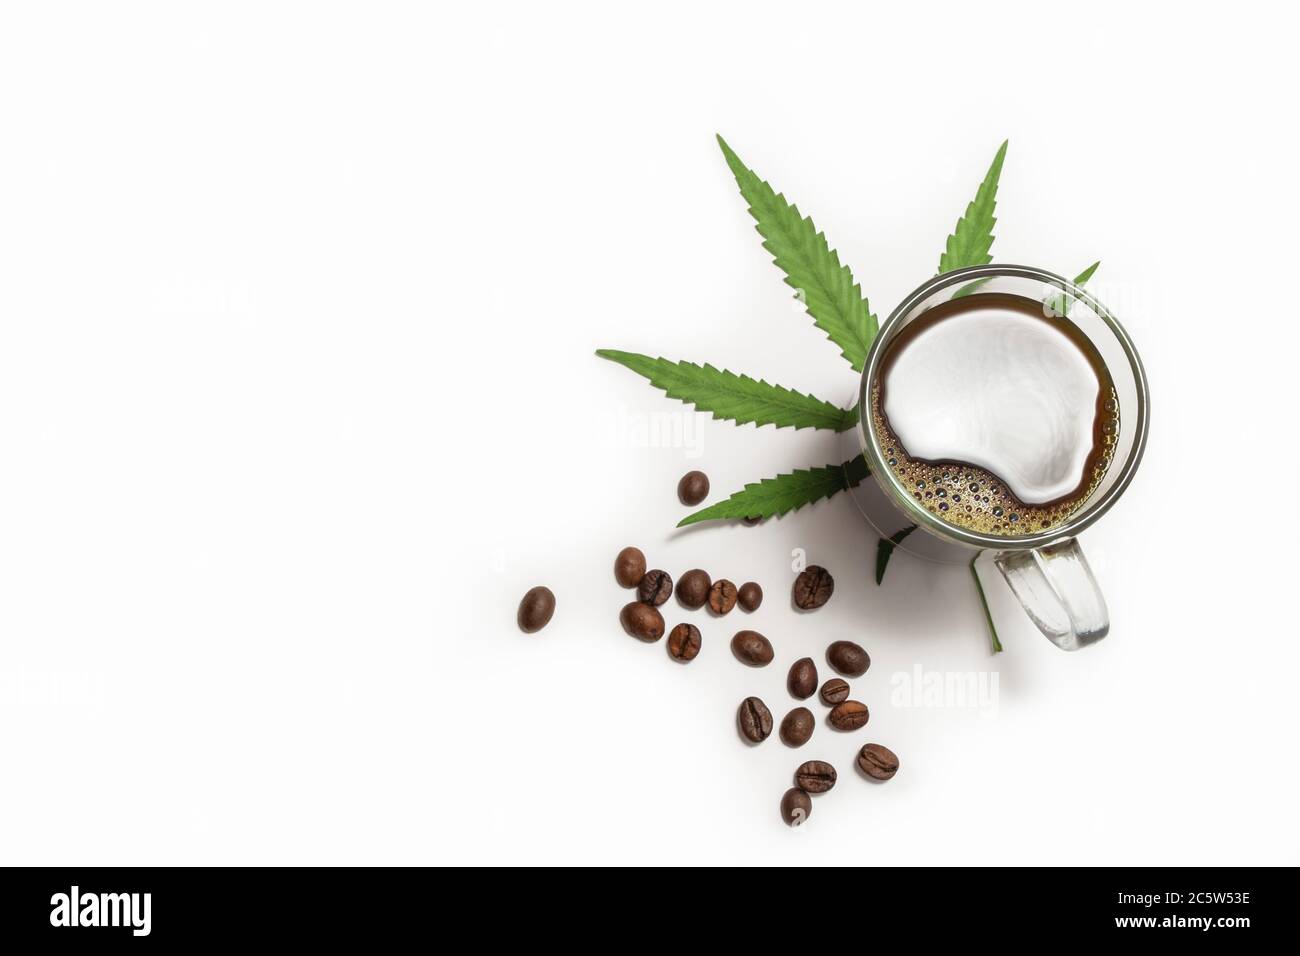 Above view of cannabis-infused coffee in a glass cup on white background with copy space Stock Photo